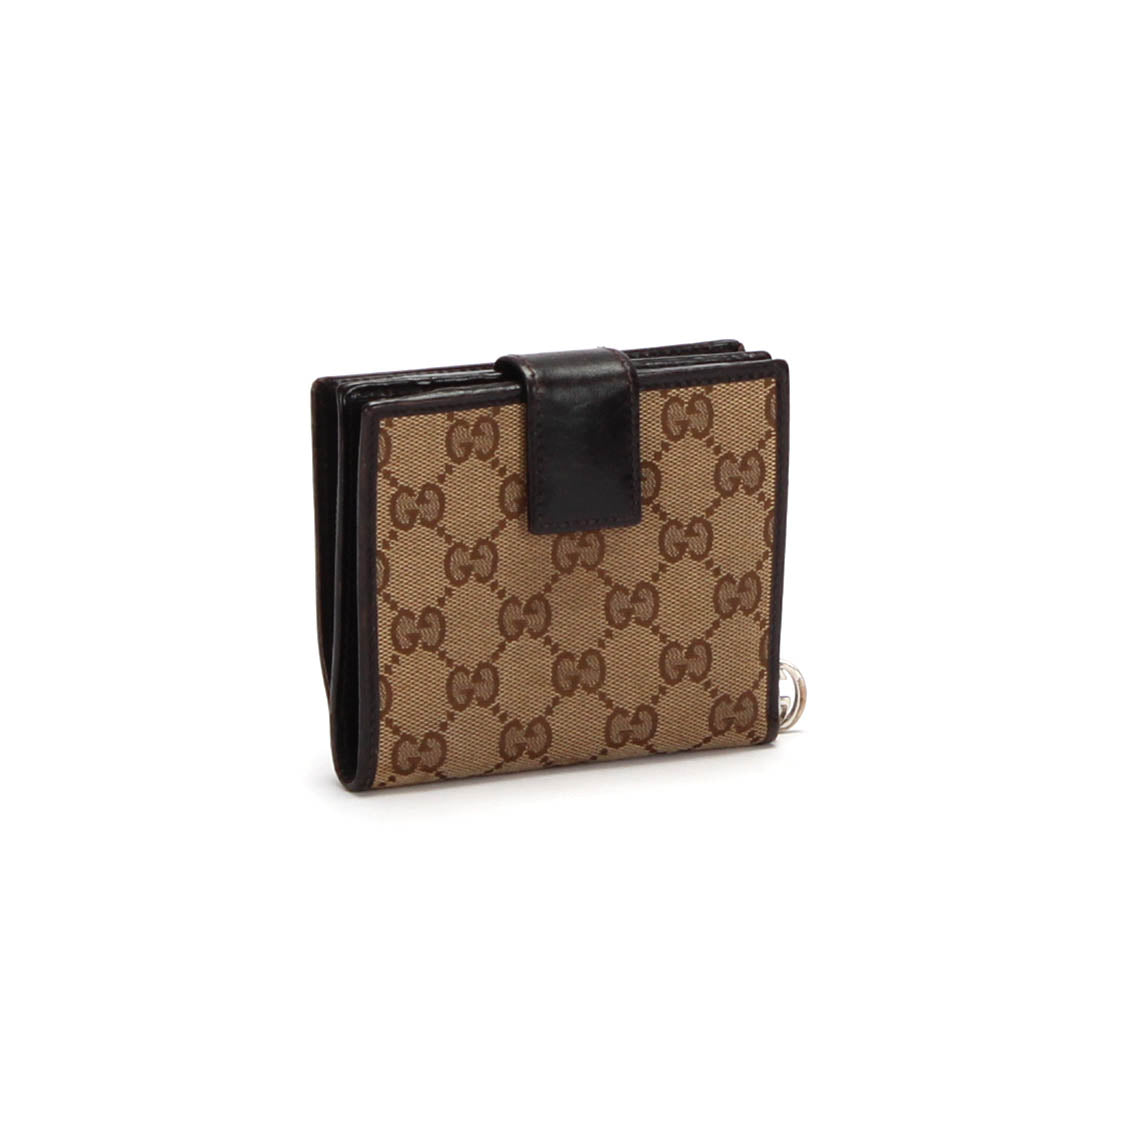 GG Canvas Twins French Wallet